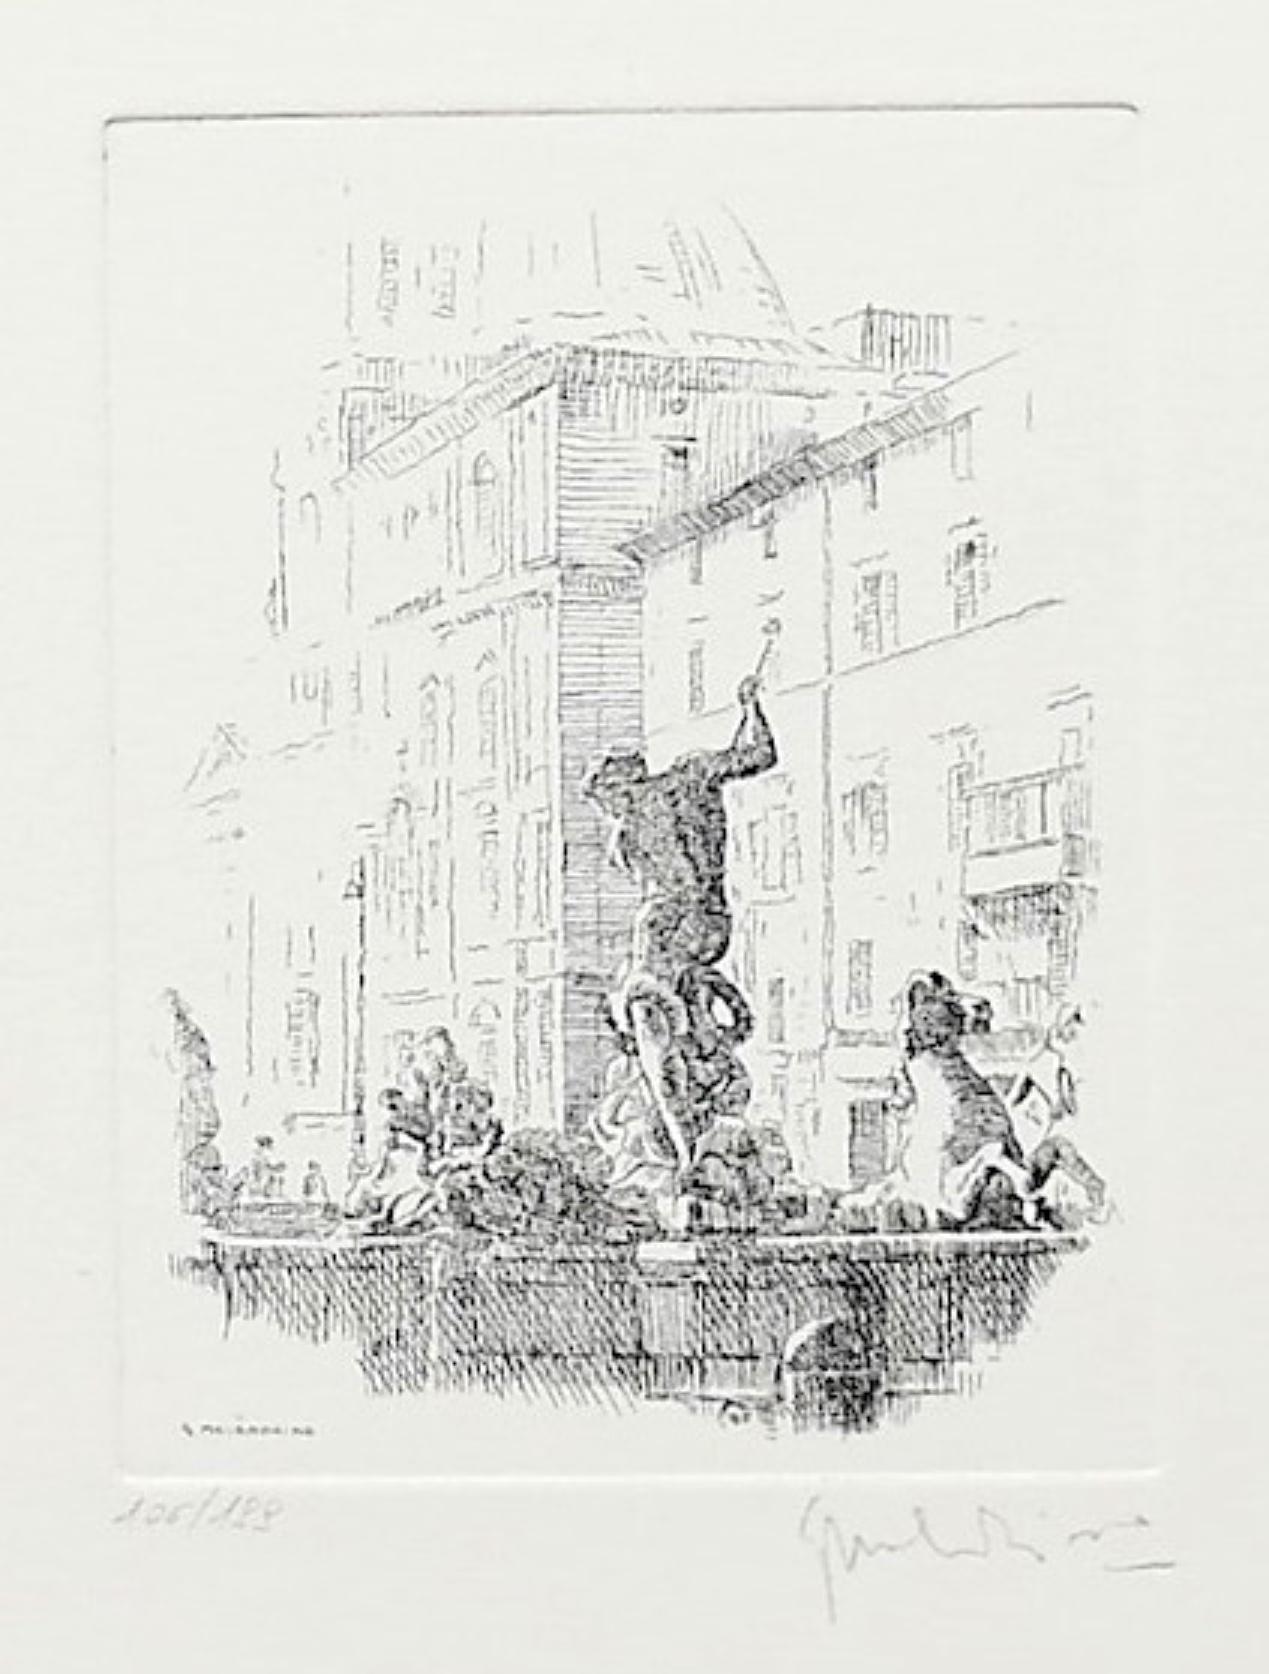 Navona Square - Rome is an original artwork realized by Giuseppe Malandrino.

Original print in etching technique.

Hand-signed by the artist in pencil on the lower right corner. Numbered on the lower-left corner. Edition 148/199.

Image Dimensions: